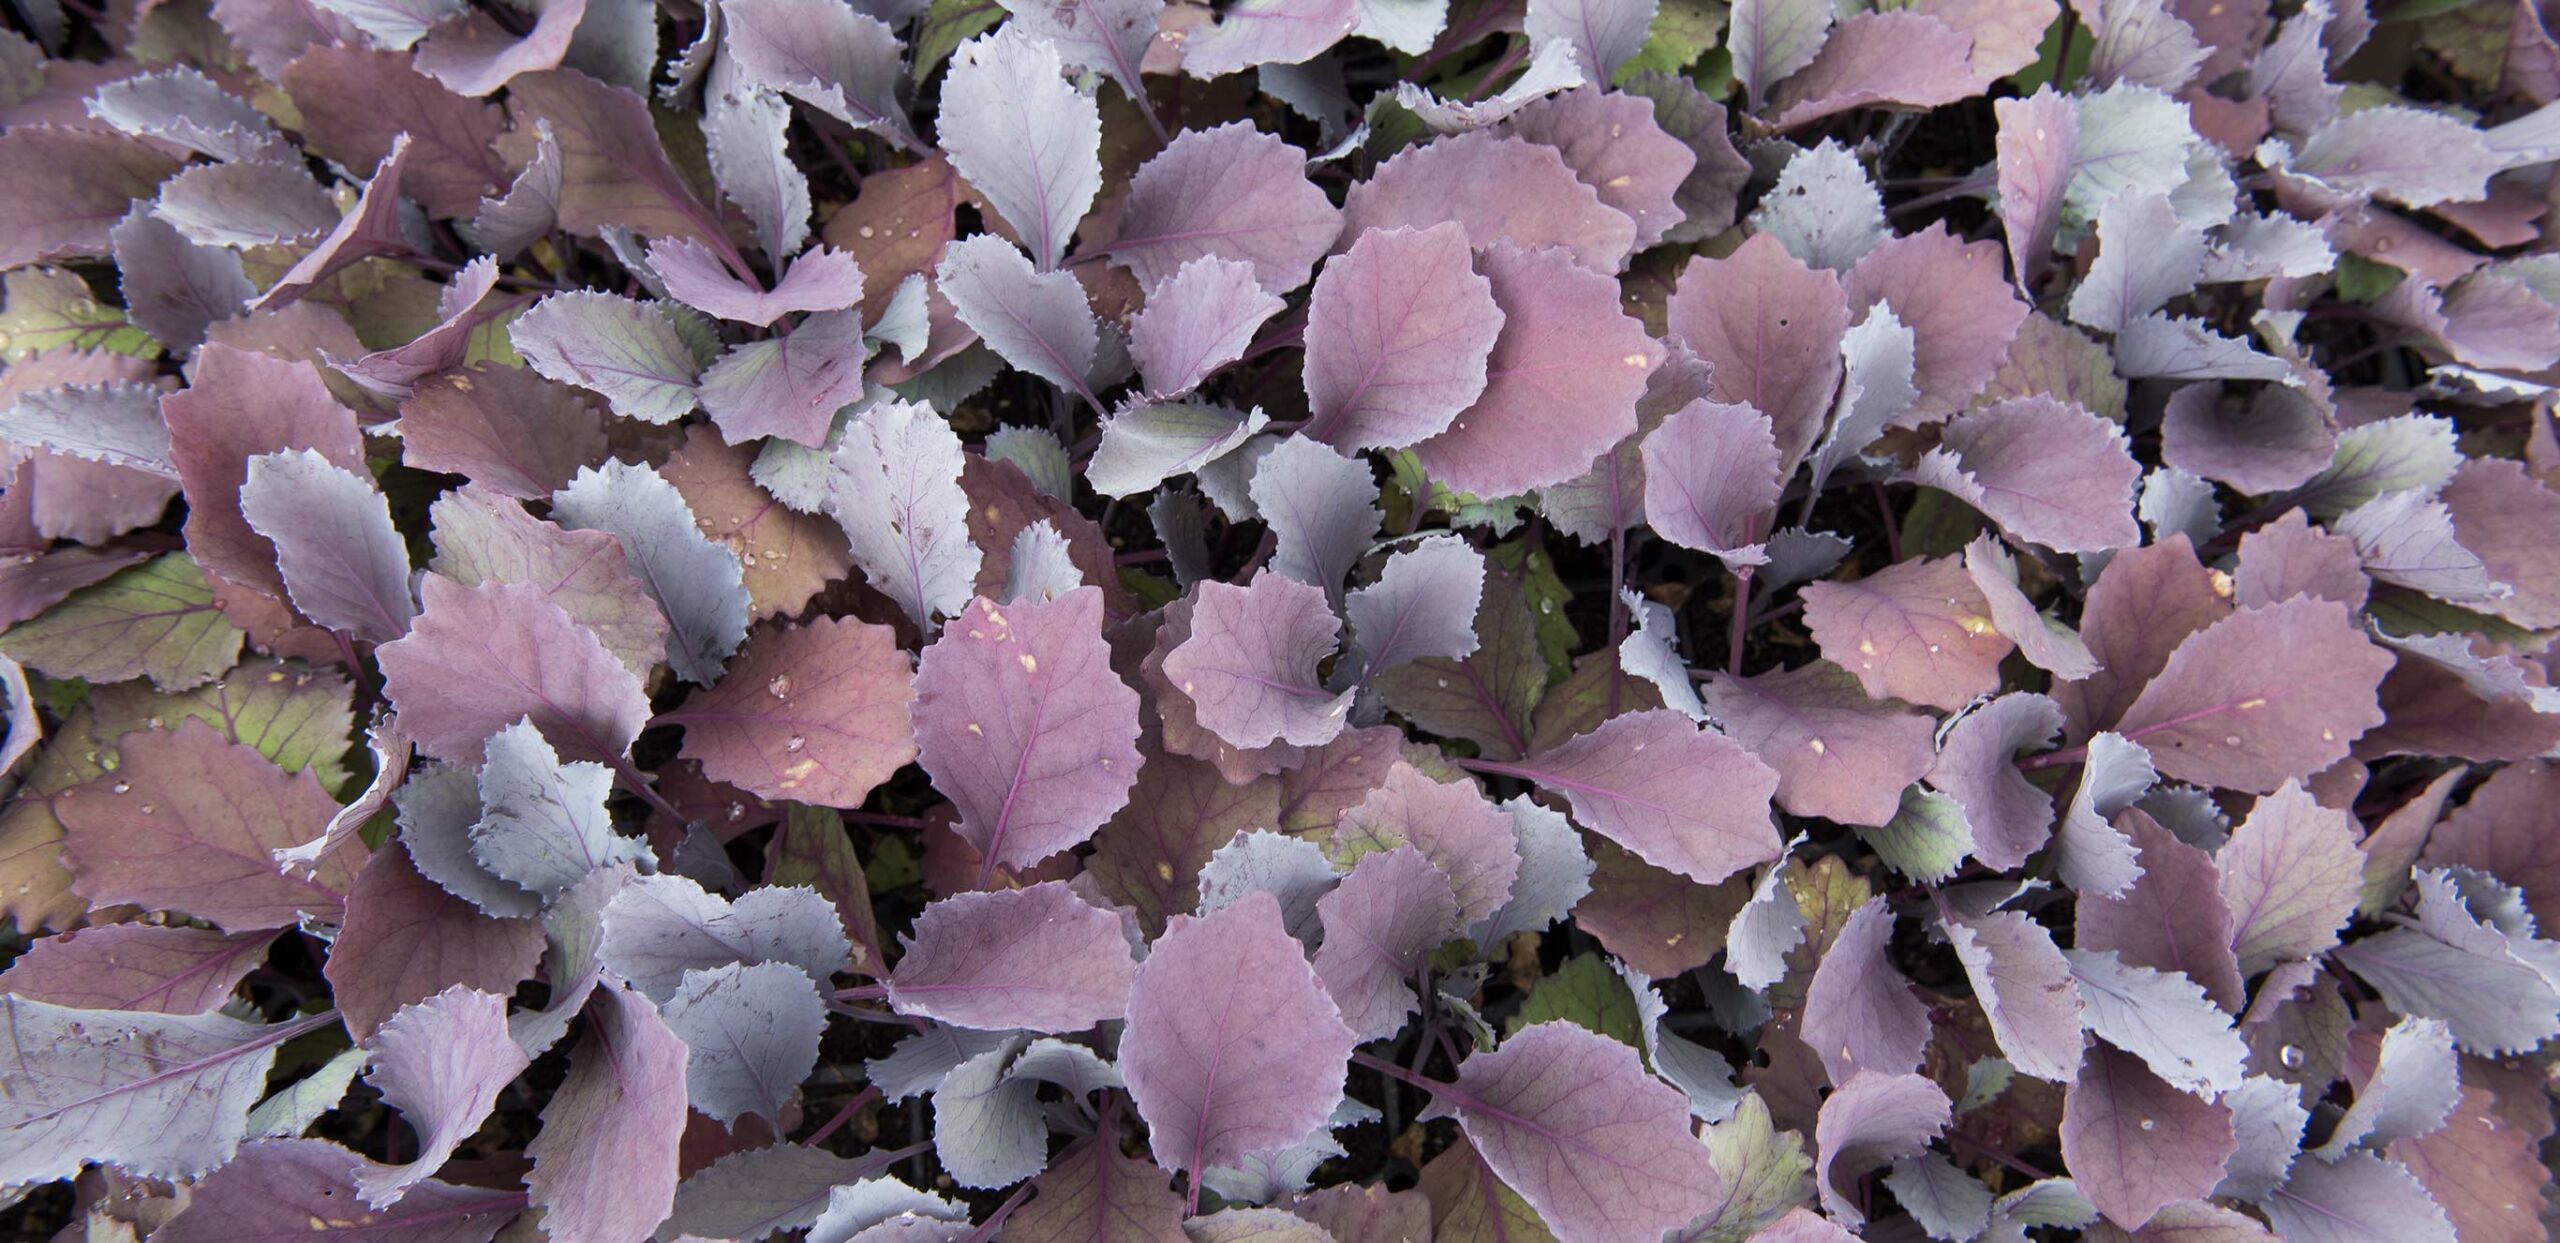 Patch of purple lettuce, Family and Friends Support Group, Cooley Dickinson Hospital, 30 Locust Street, Northampton, MA 01060.